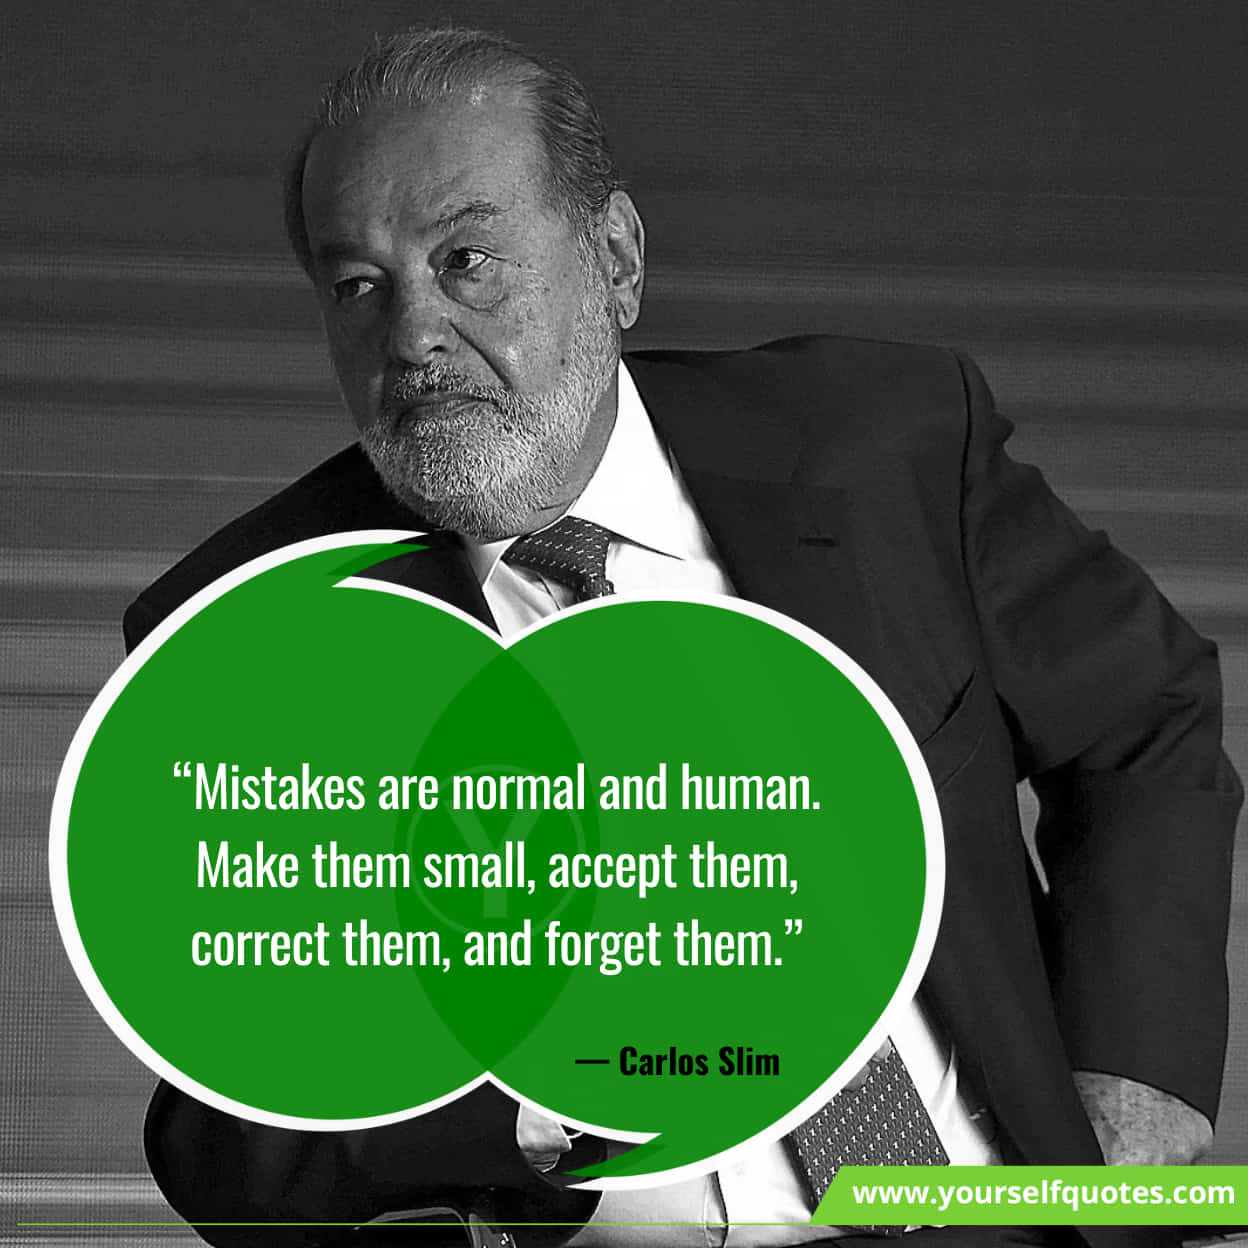 Carlos Slim Helu Quotes About Mistakes